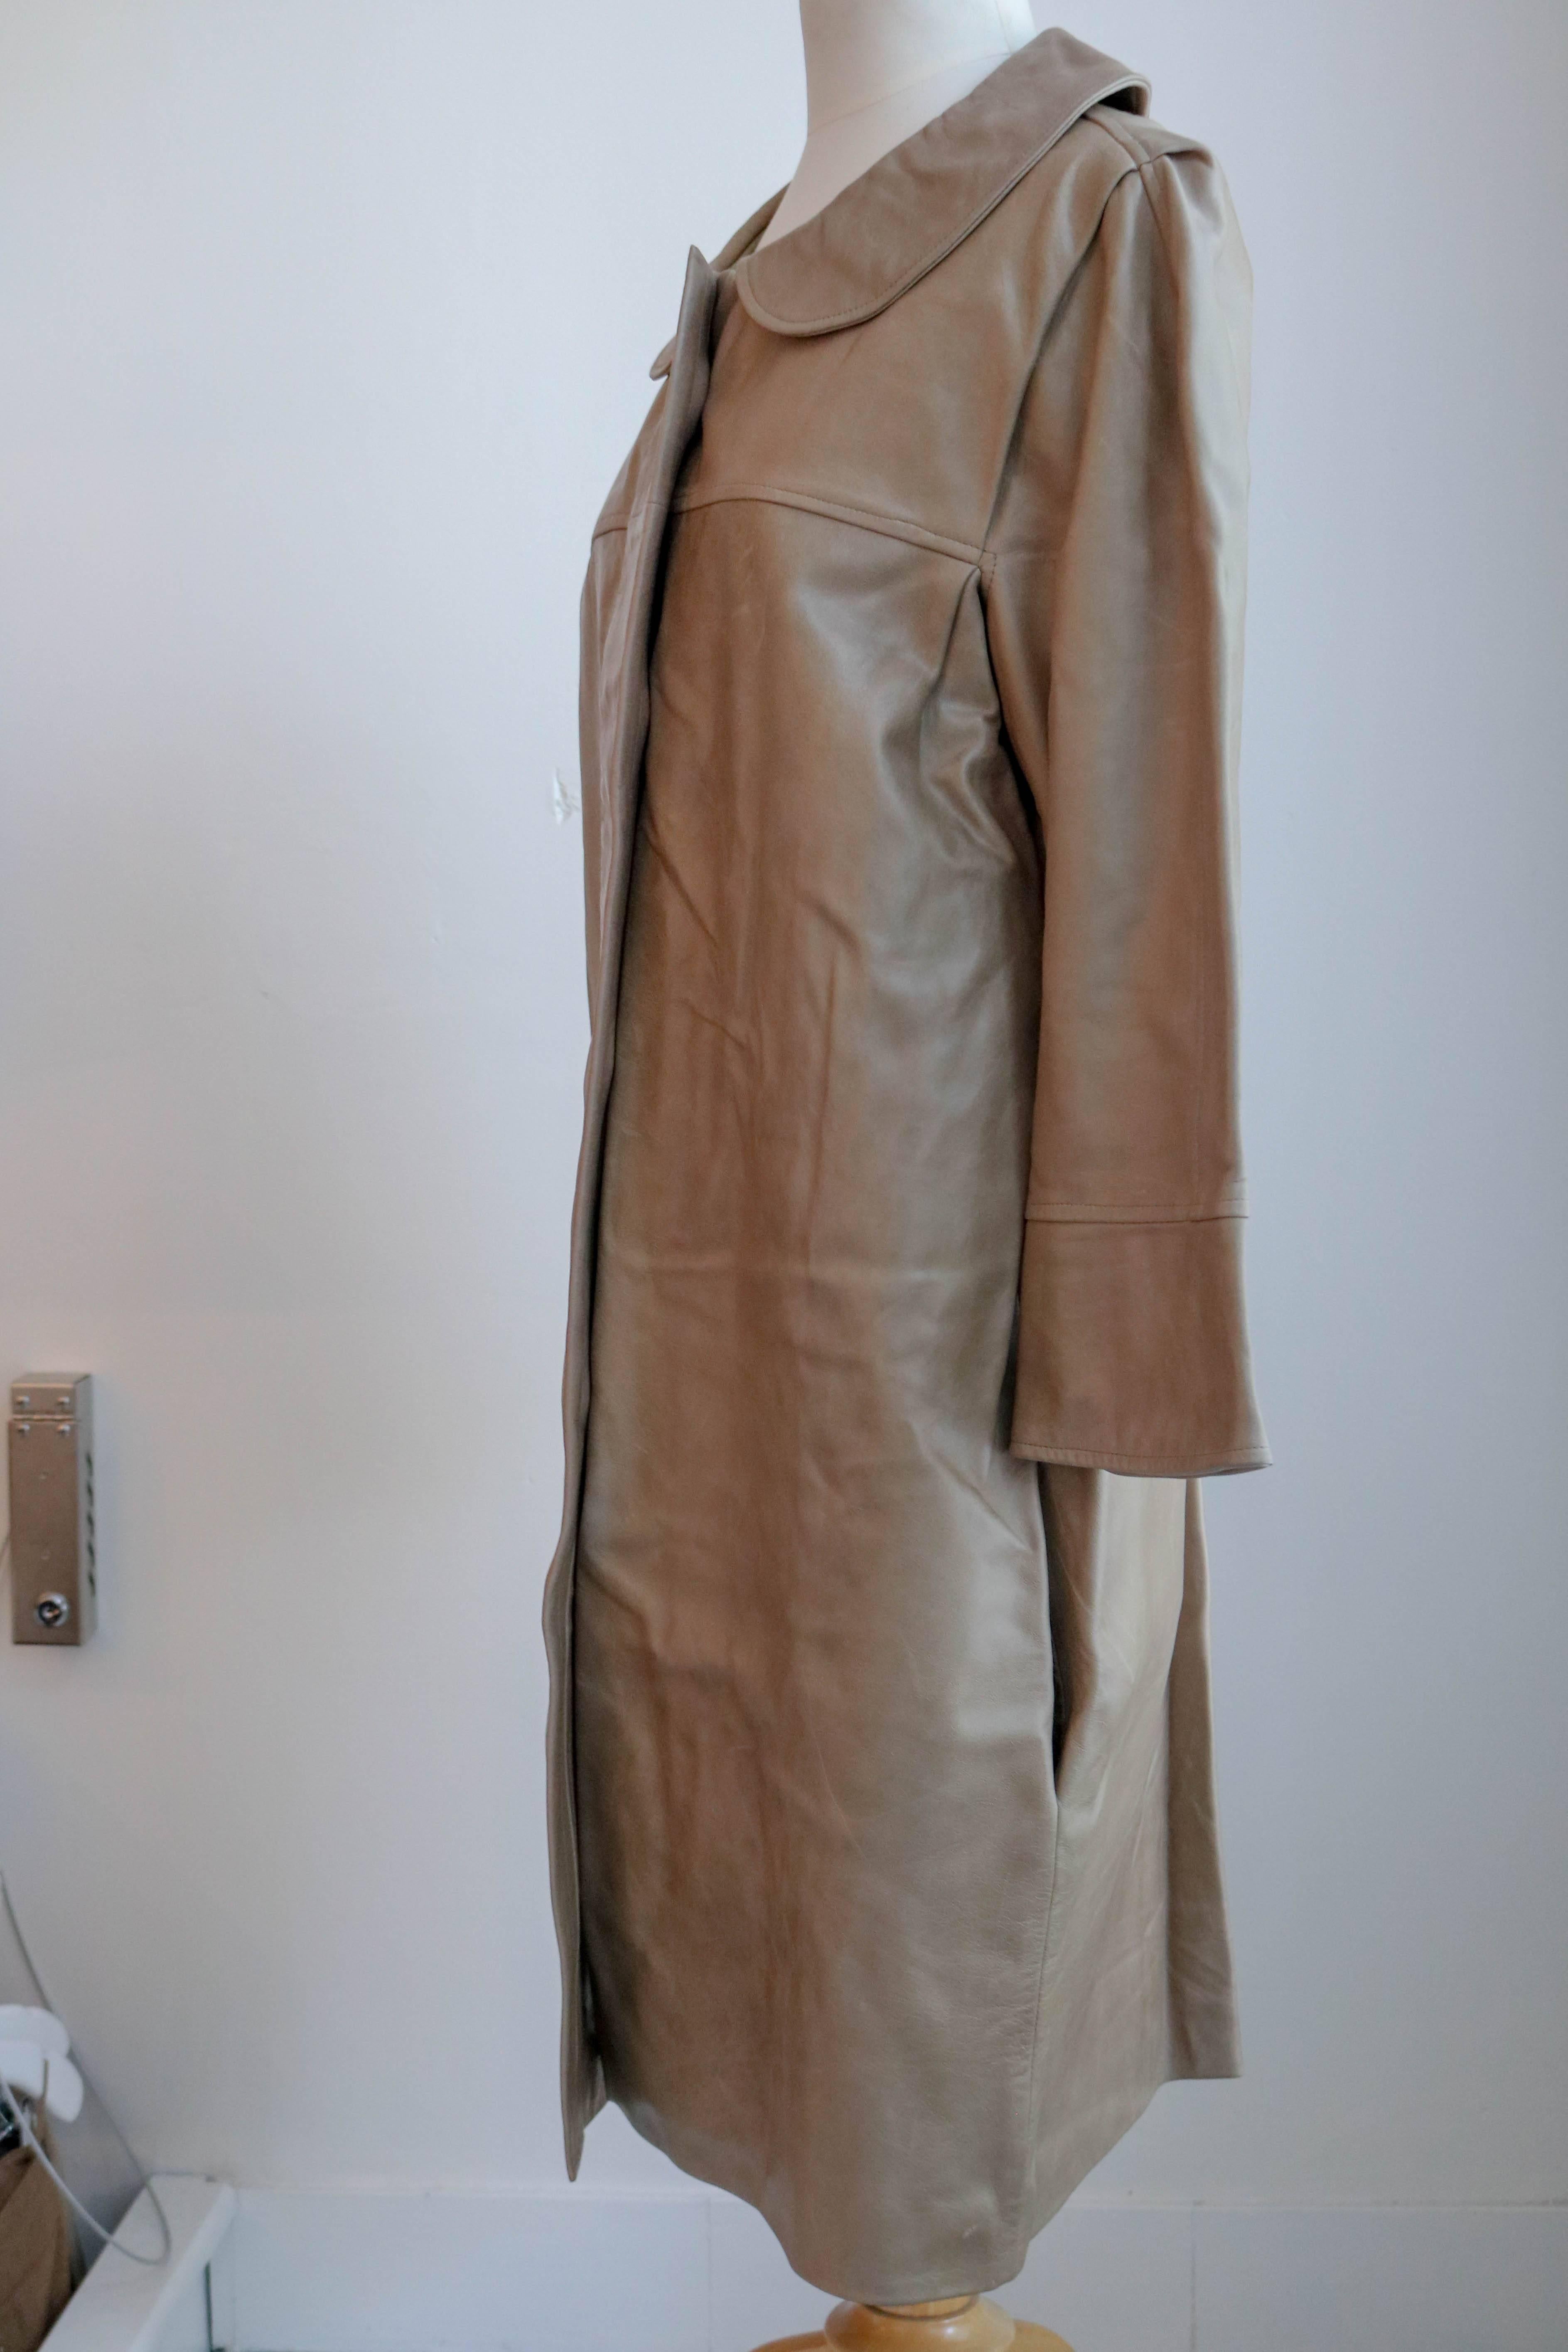 Chloe Lambskin Long Leather Coat  In Good Condition For Sale In San Francisco, CA